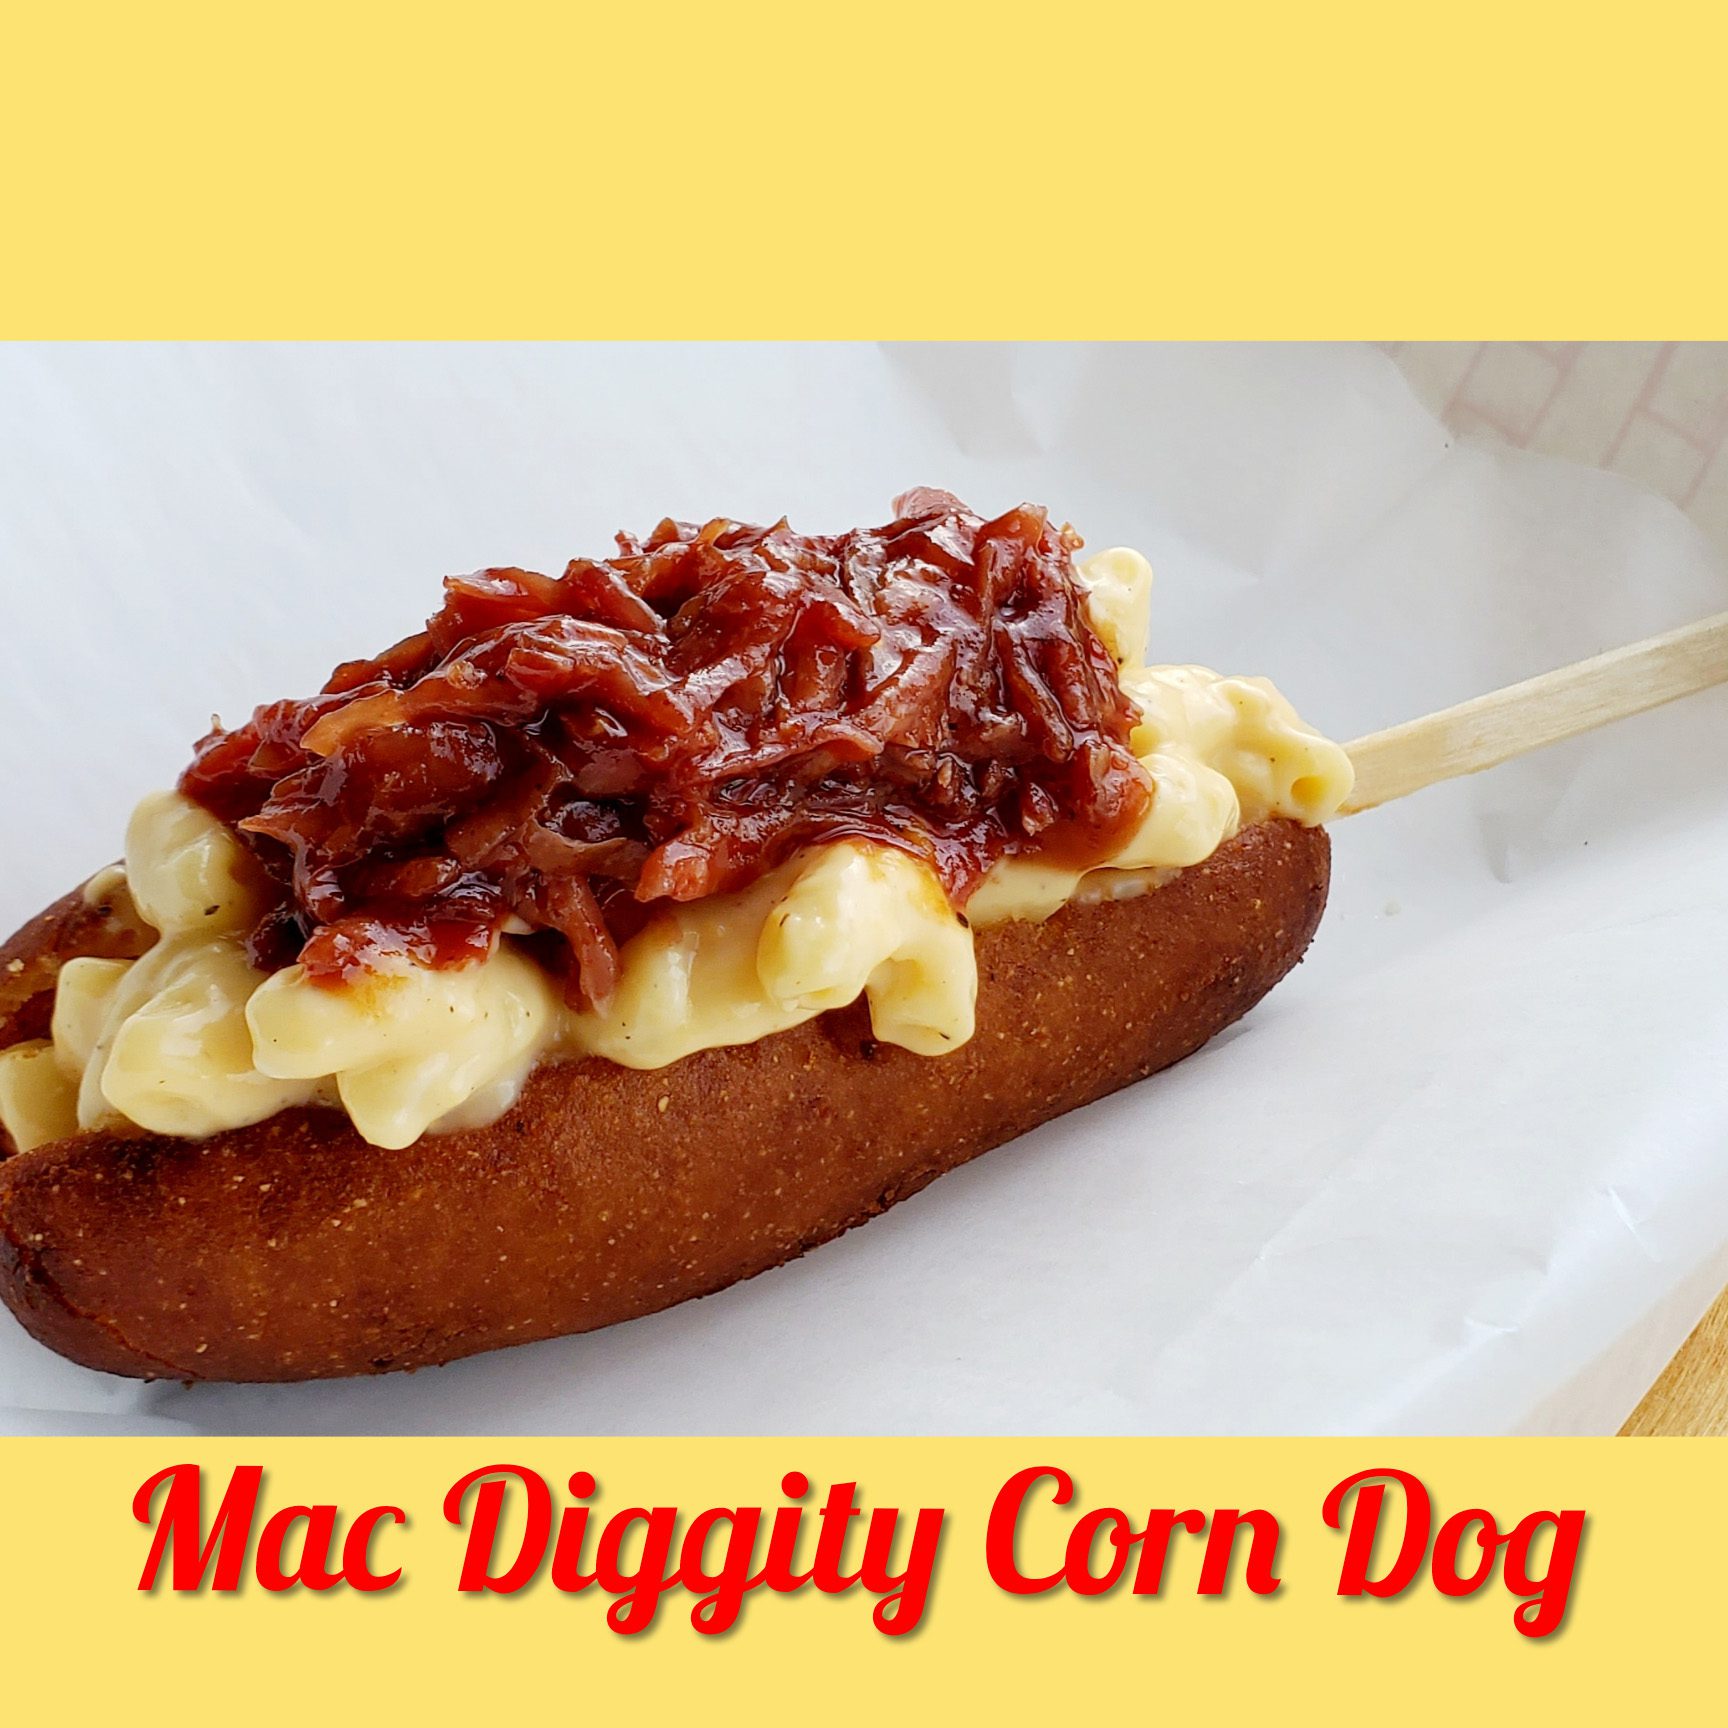 Mac Diggity Corn Dog - by Gobble Gobble Food Truck